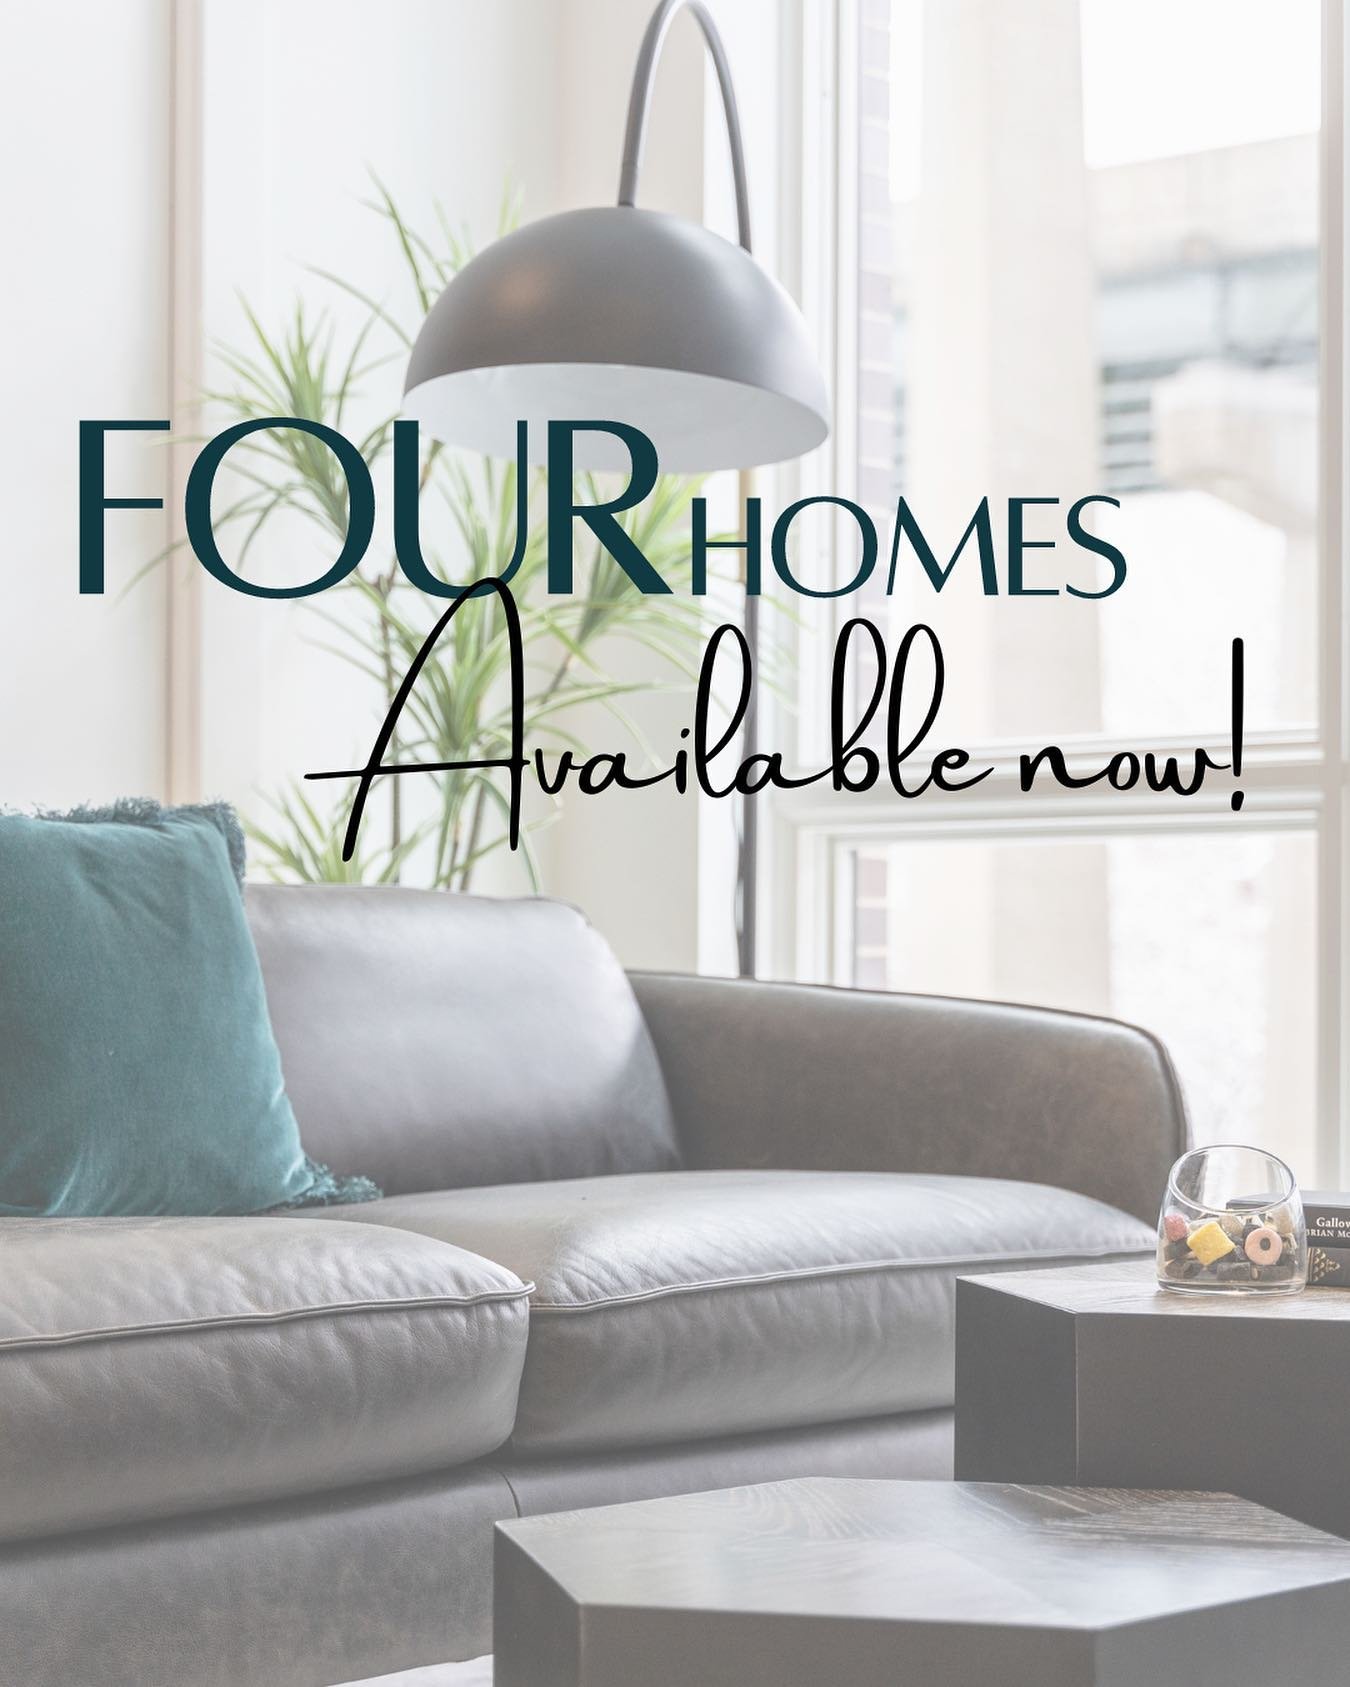 Four homes available now! 
#403
$4,095
2 Bed | 2 Bath | 1,078 Sq Ft
&bull;
#504
$3,925
2 Bed | 2 Bath | 886 Sq Ft
&bull;
#601
$3,195
1 Bed | 1 Bath | 807 Sq Ft
&bull;
#605
$4,295
2 Bed | 2 Bath | 1,165 Sq Ft

Contact Todd Maloof for more information
